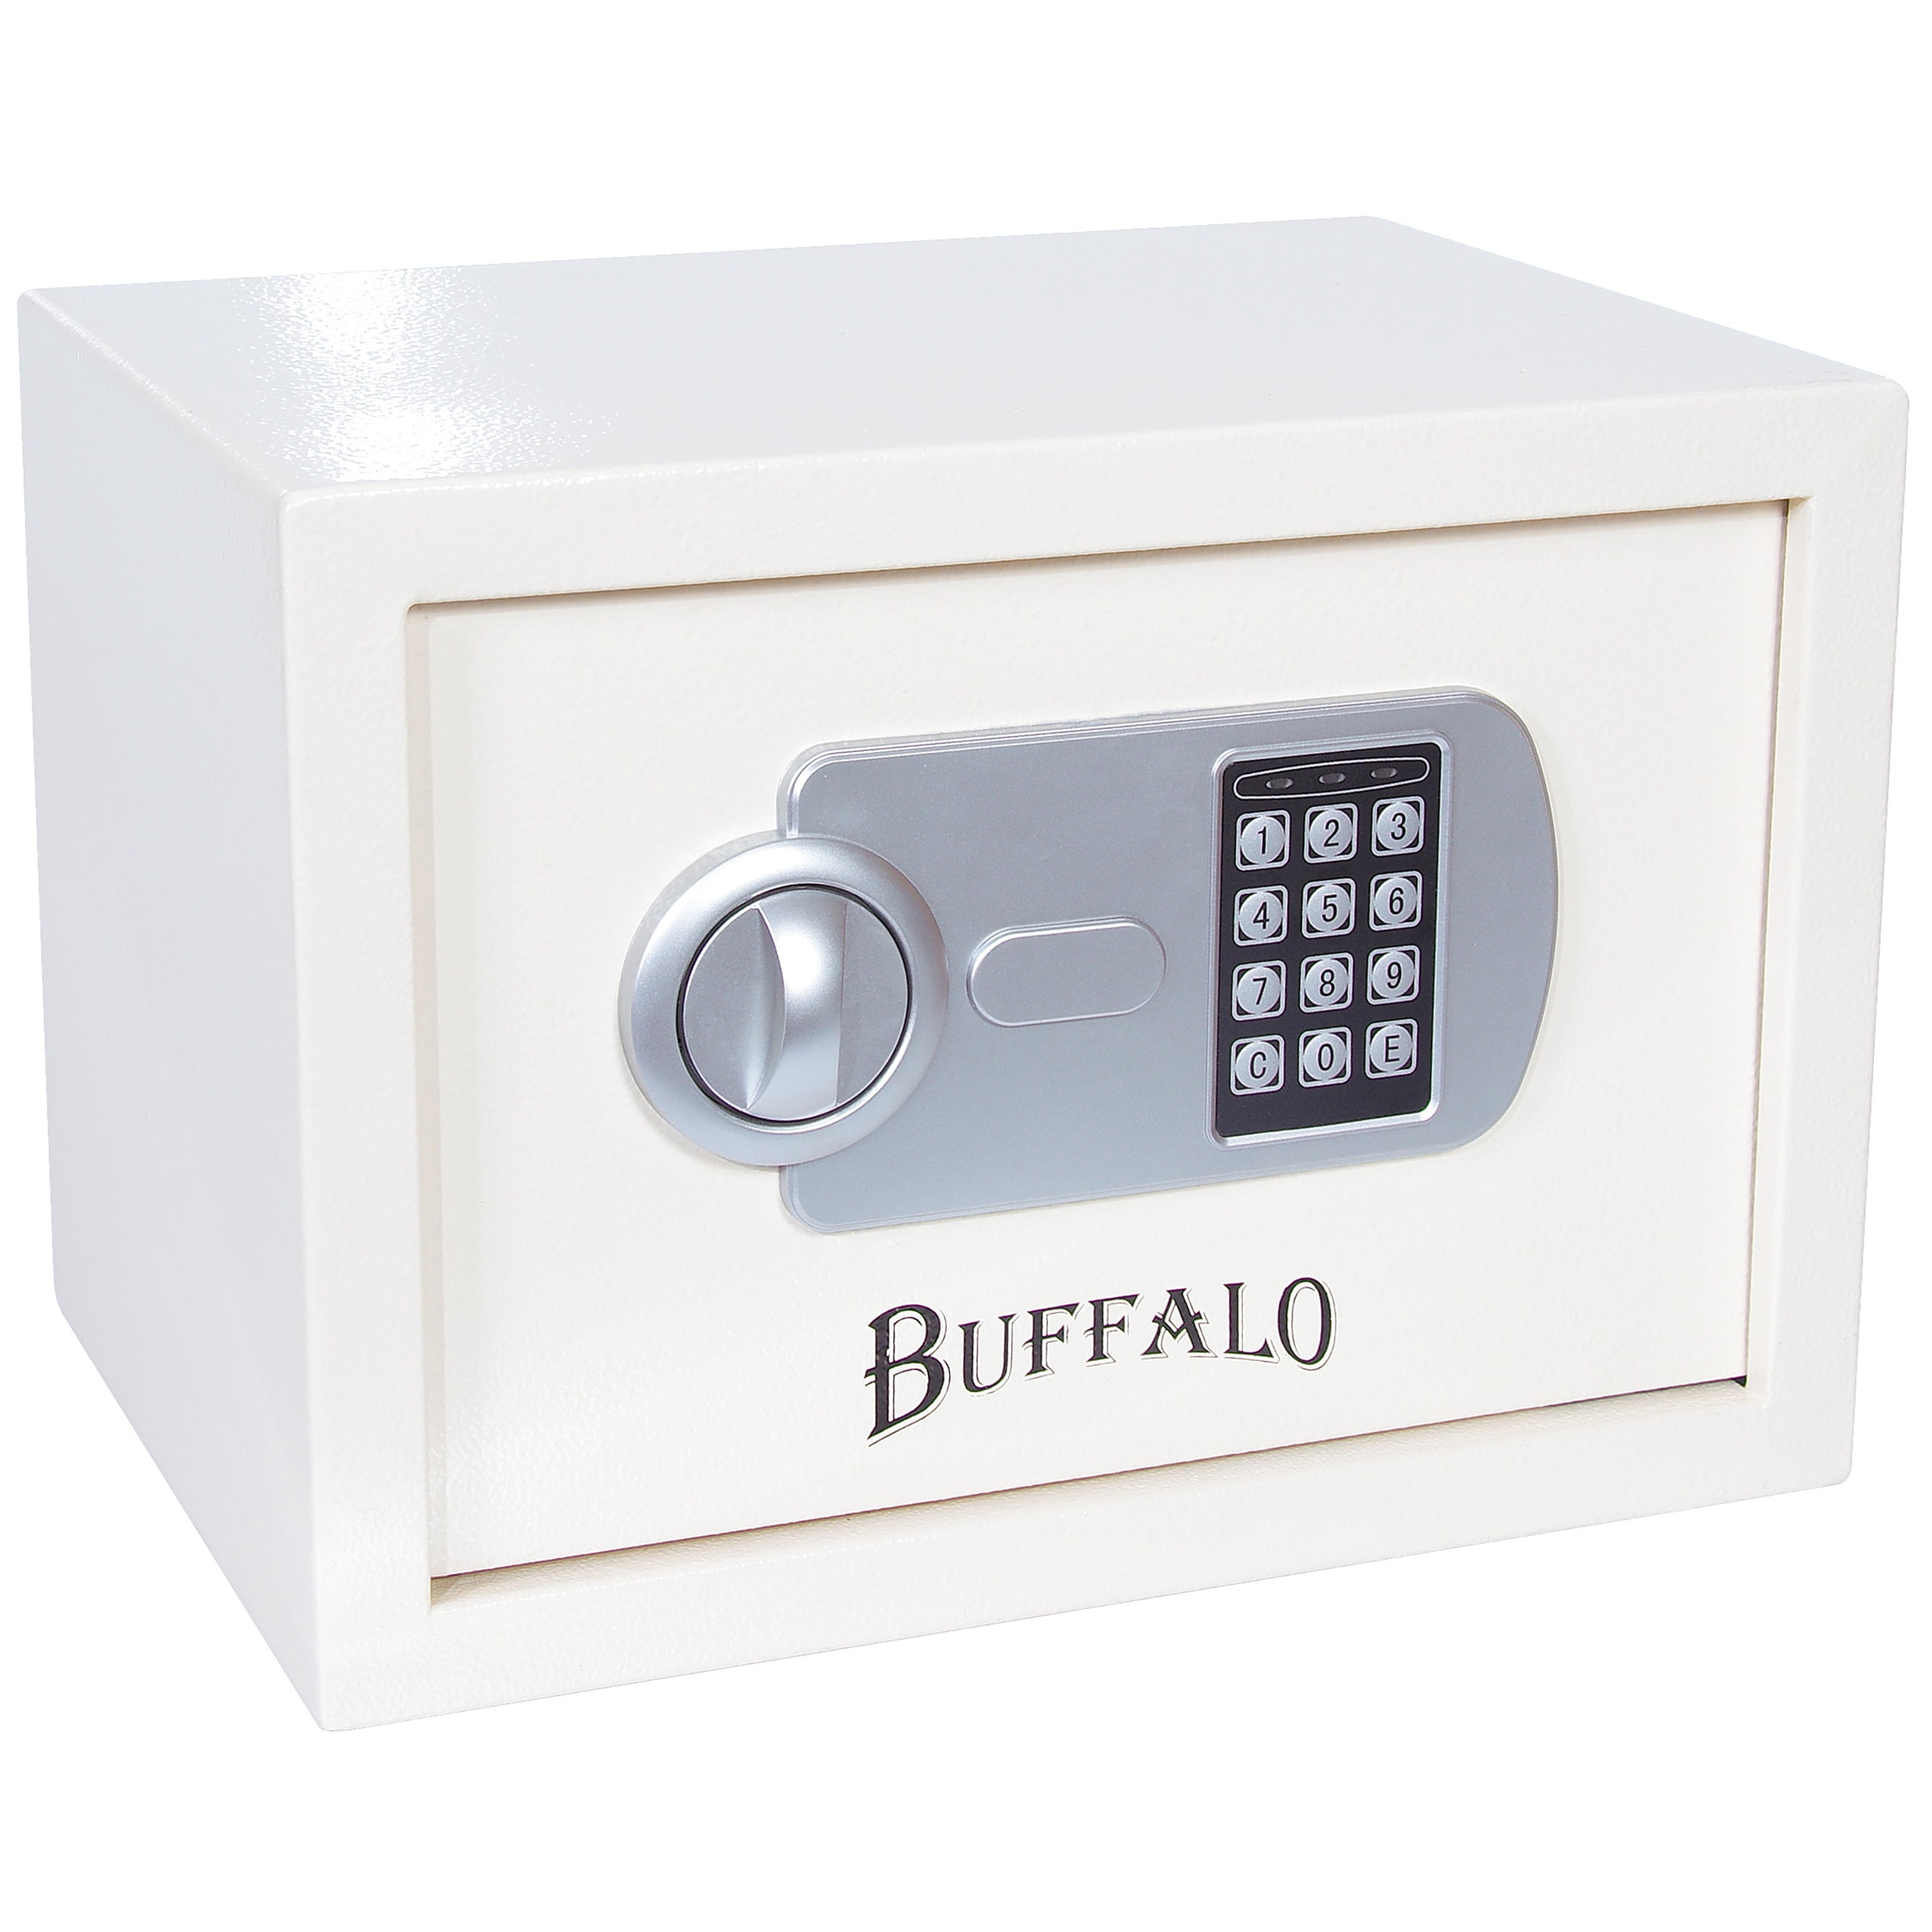 Picture of Buffalo Outdoor PPSFB Pistol Safe with Keypad Lock